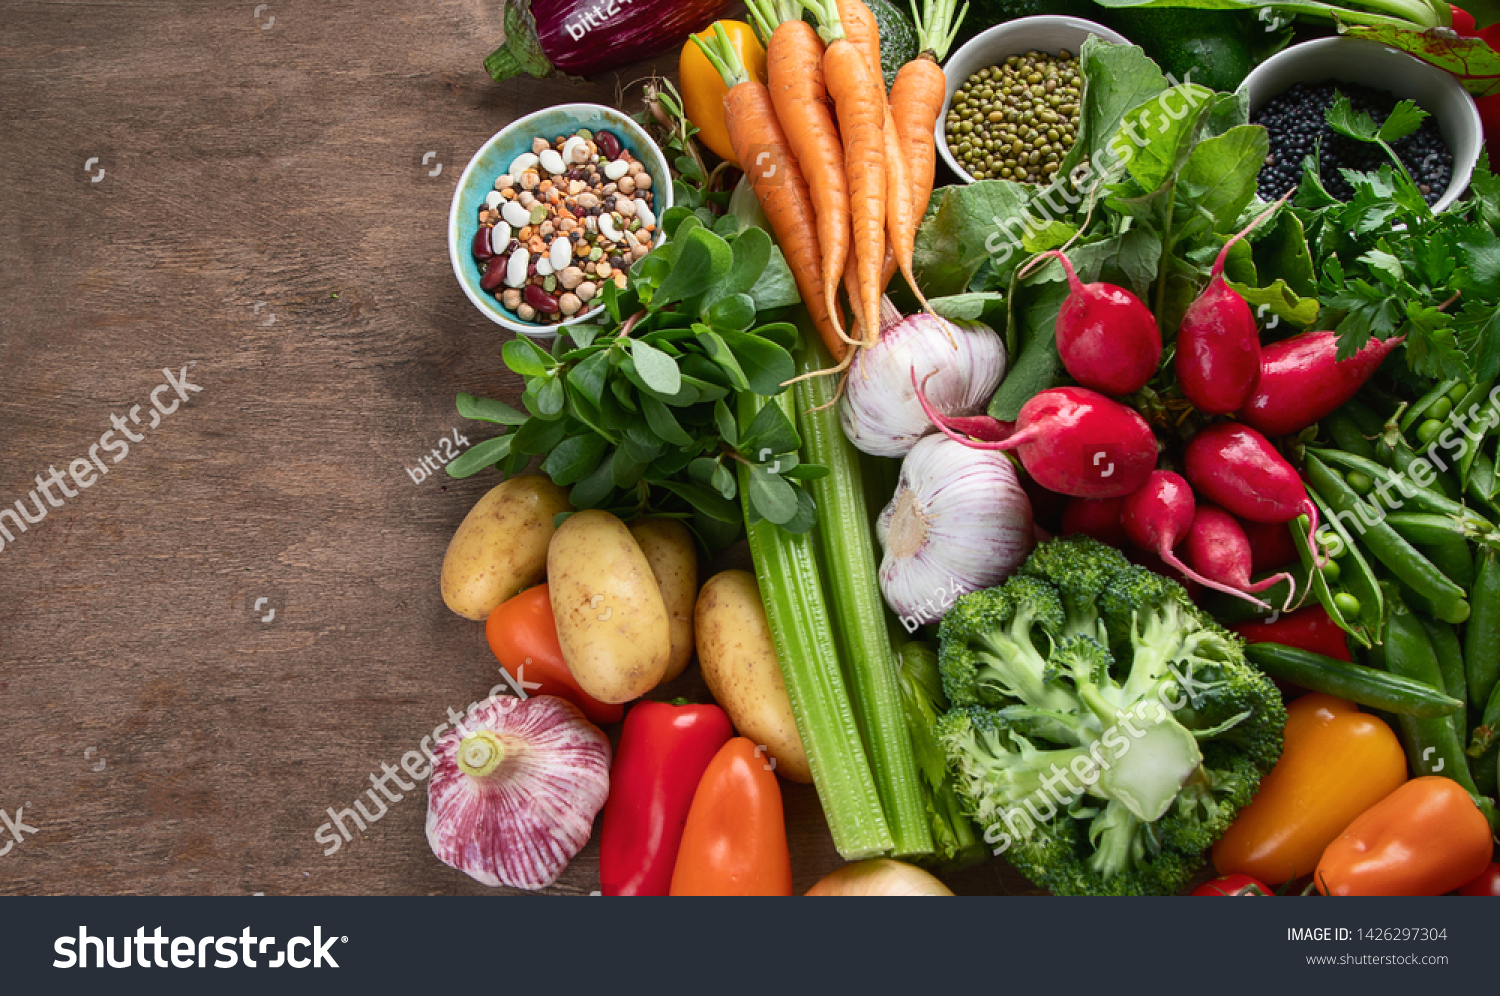 Assortment of fresh vegetables. Vegan and vegetarian diet concept. Organic local food. Top view with copy space #1426297304